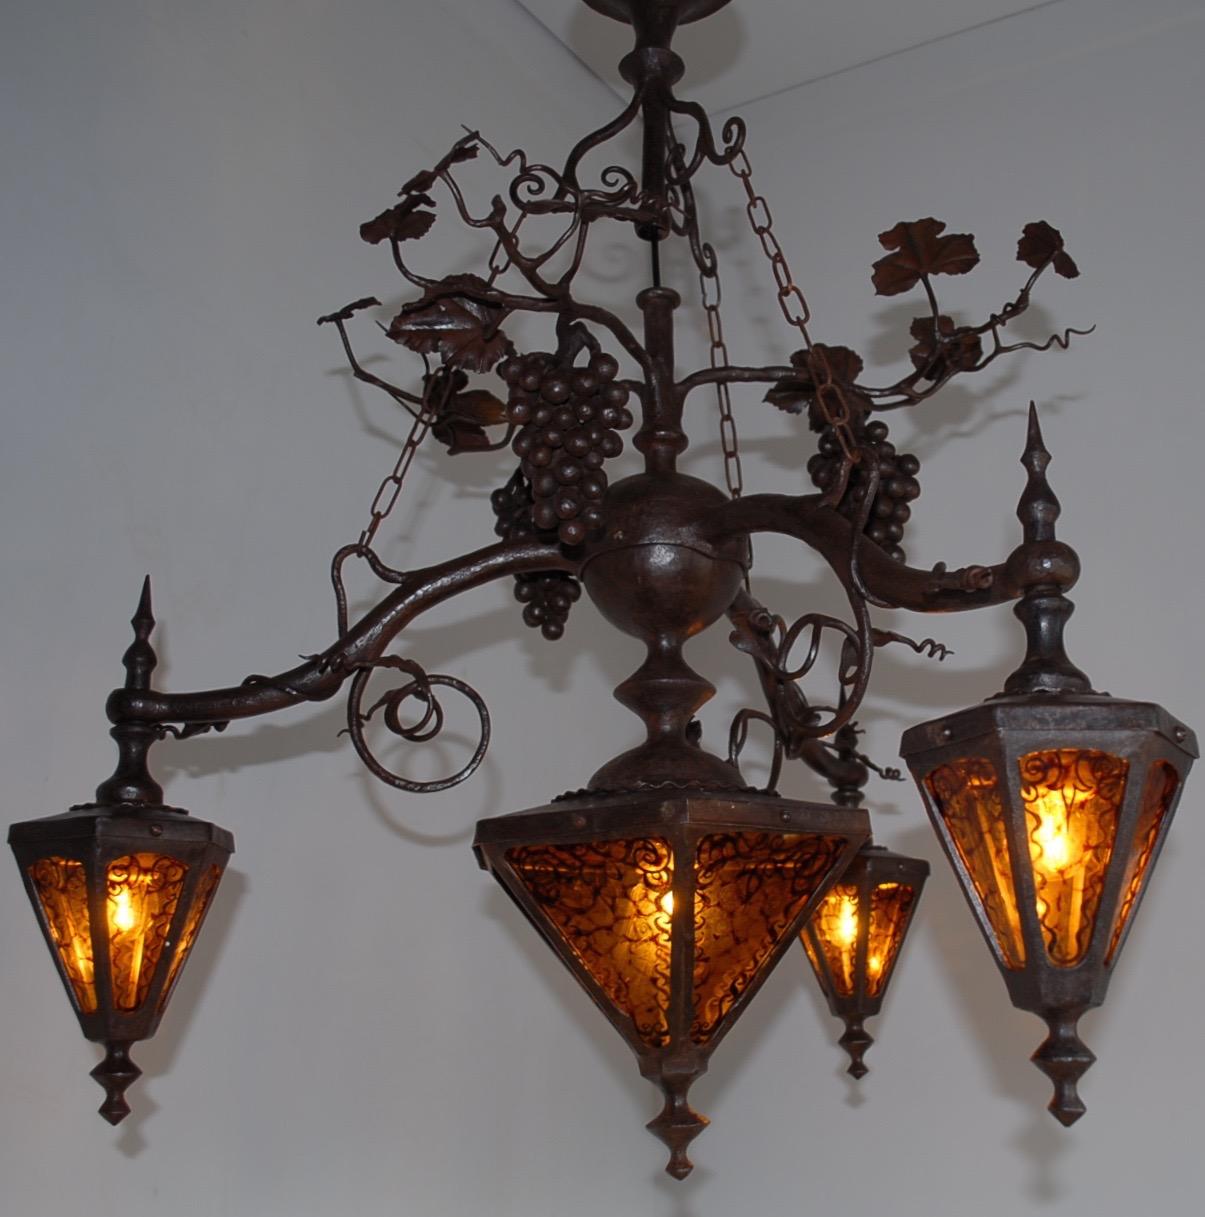 Amazing & marked with a monogram, Arts and Crafts chandelier.

This all-handcrafted work of lighting art is the only one of its kind and in an amazing condition. If you are a collector of top-quality, early 20th century workmanship then this forged